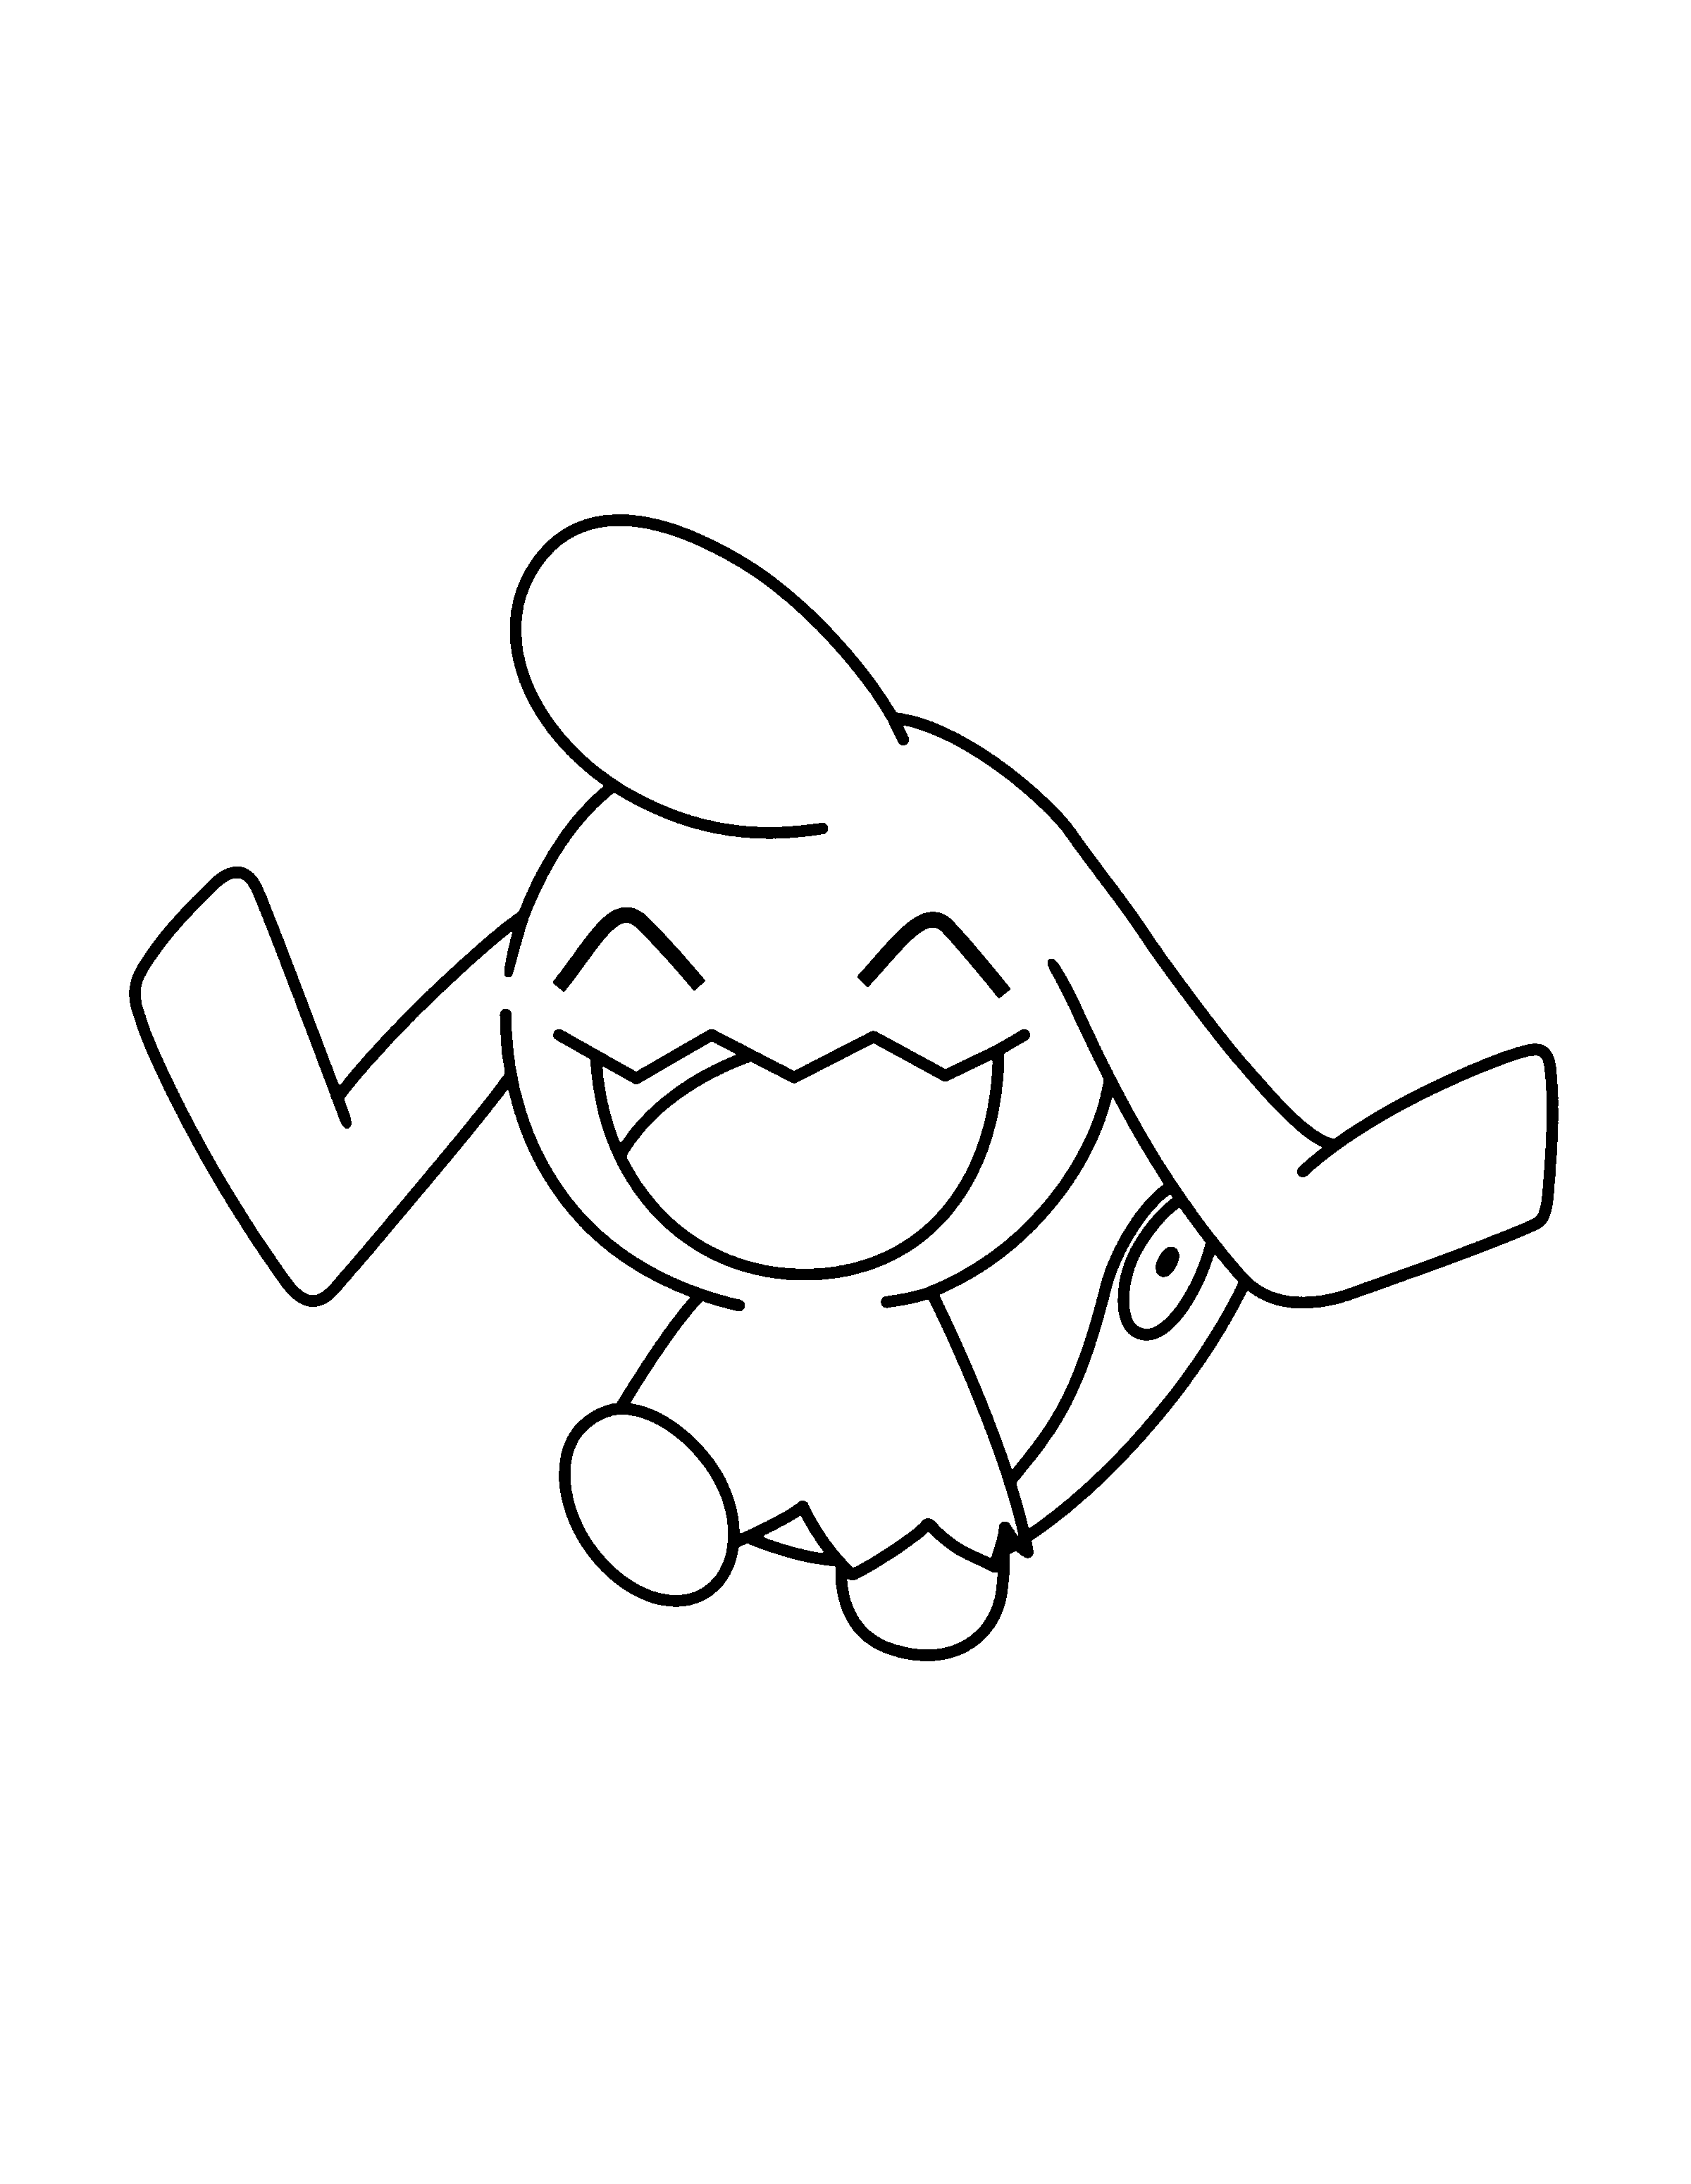 animated-coloring-pages-pokemon-image-0740